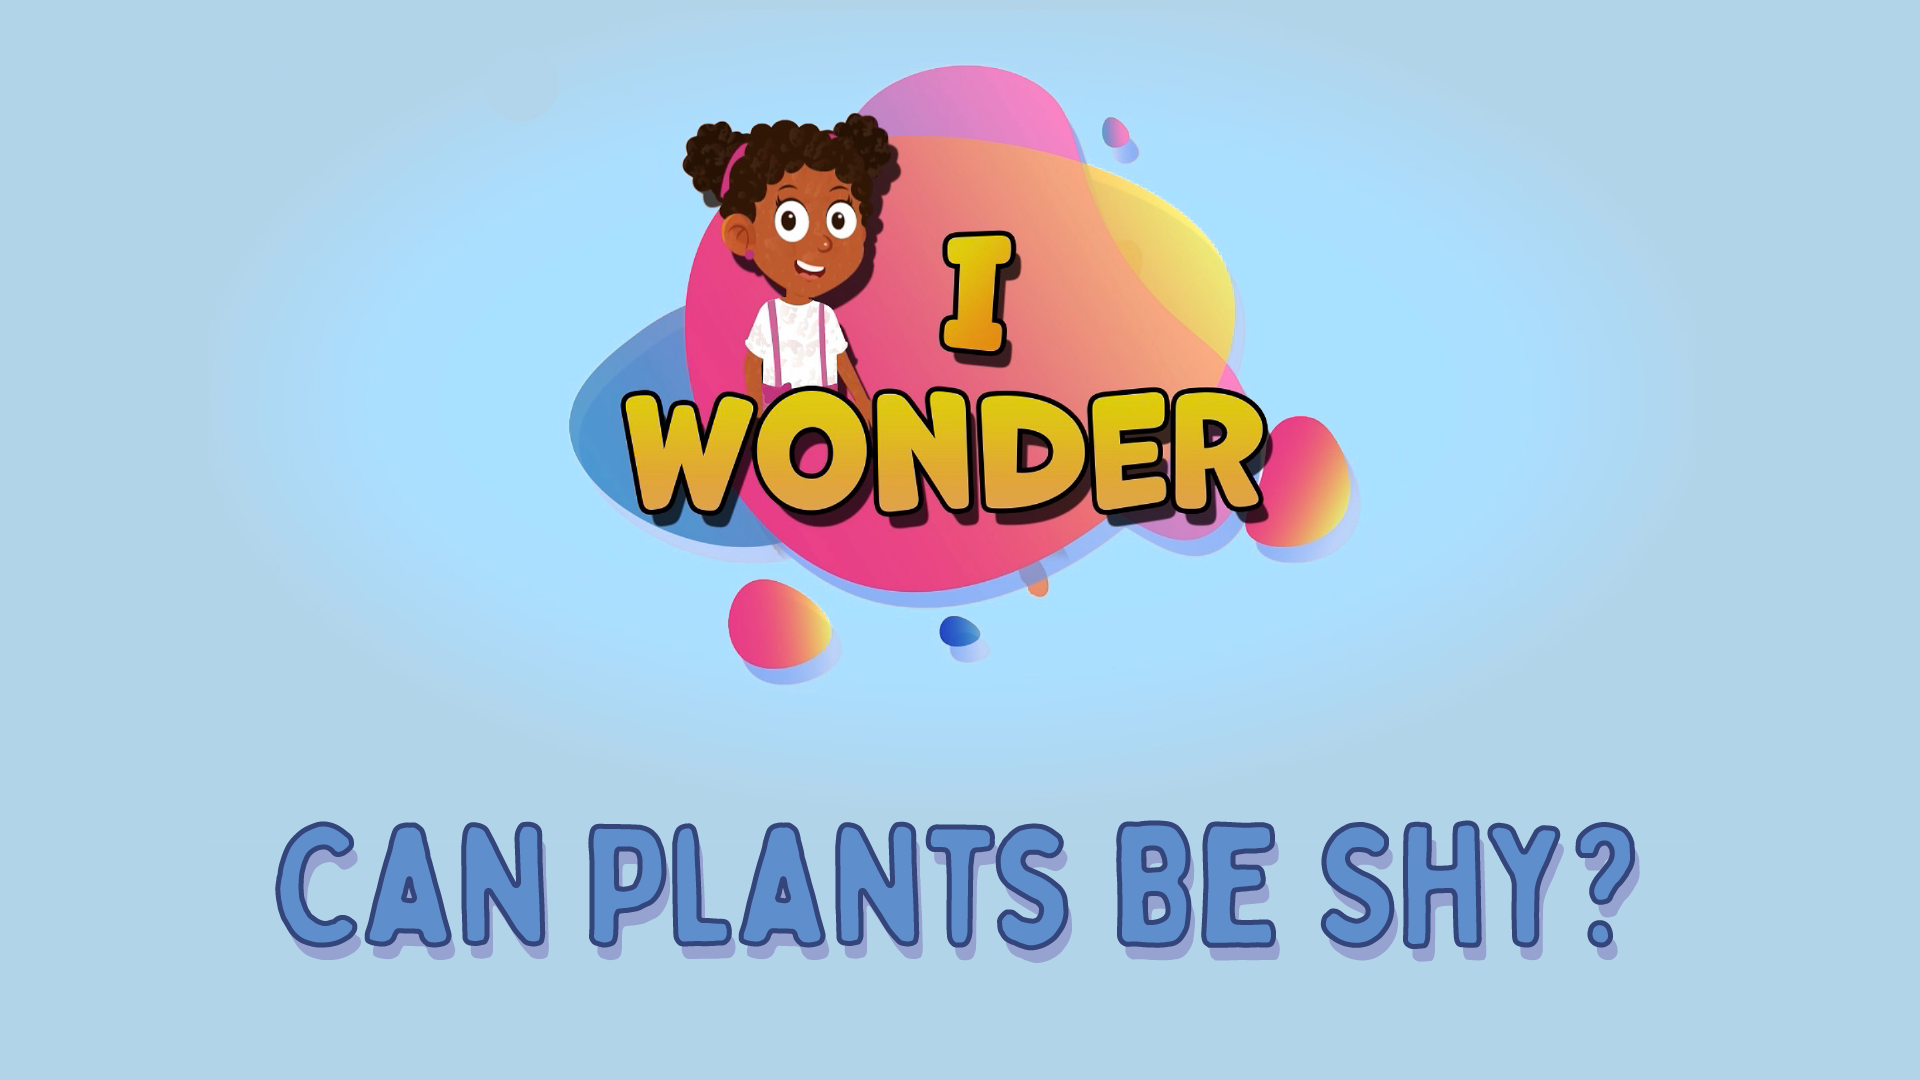 Can Plants Be Shy?